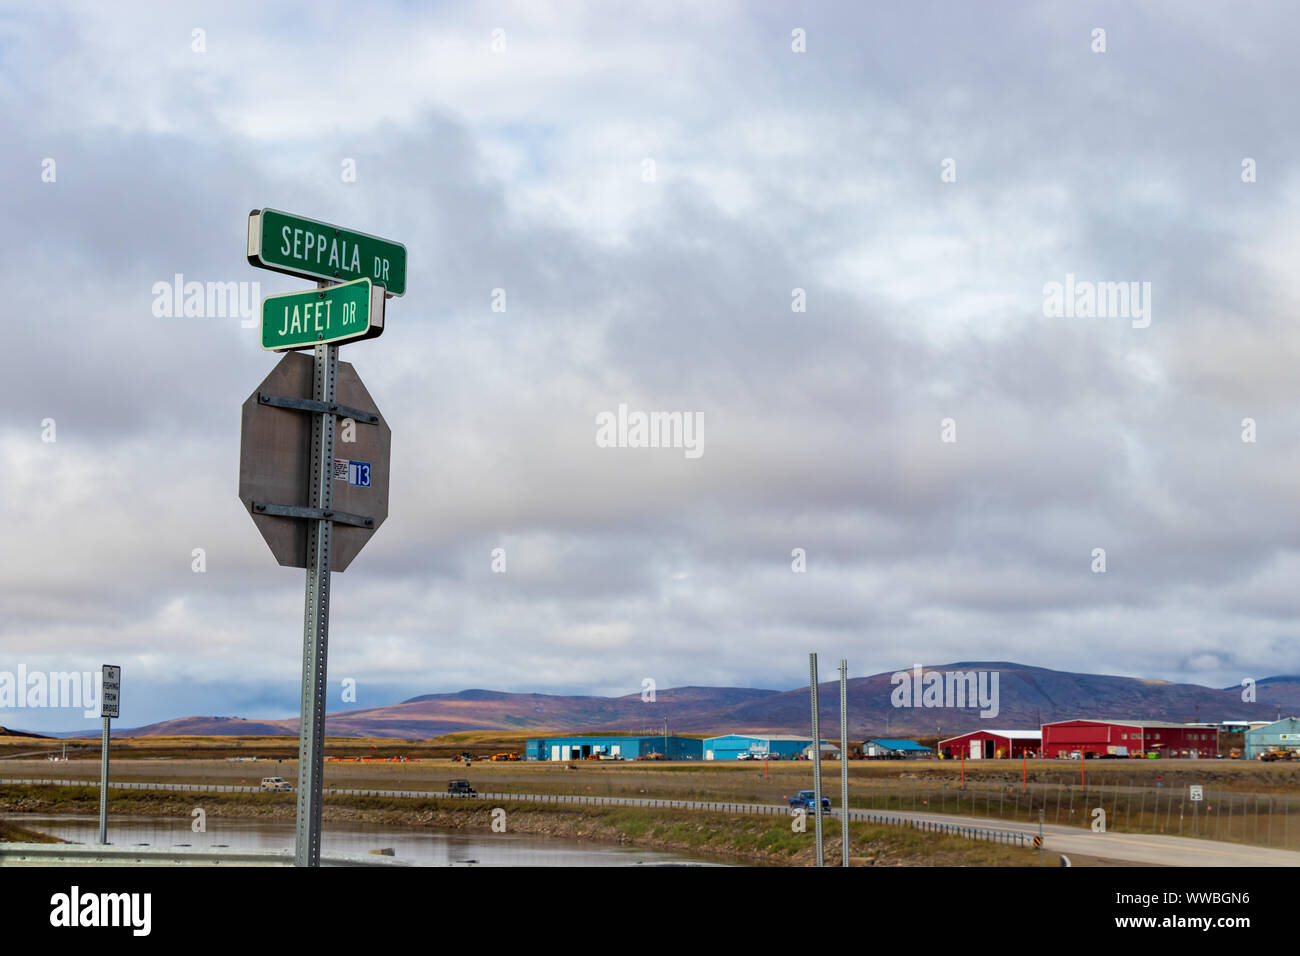 The sign of Seppala and Jafet Dr street in Nome, Alaska. Stock Photo